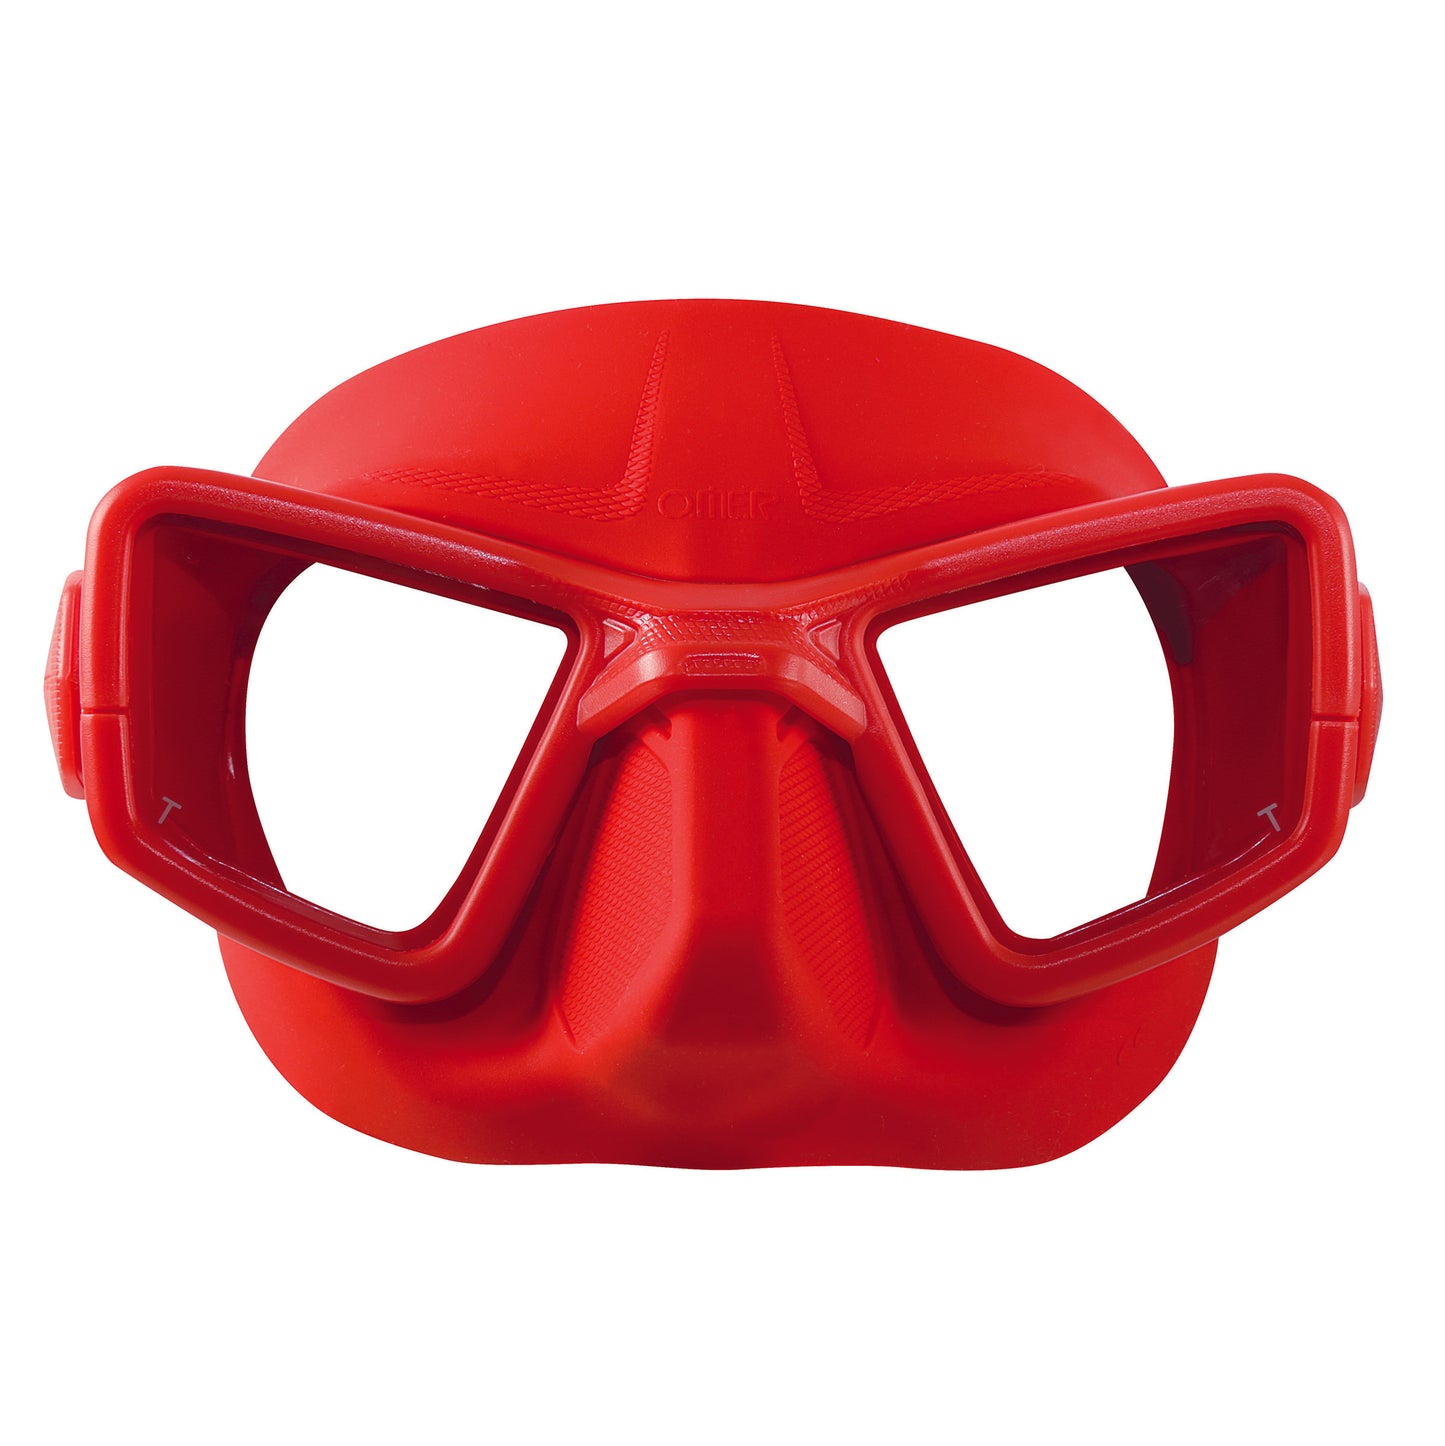 OMER UP-M1 diving mask